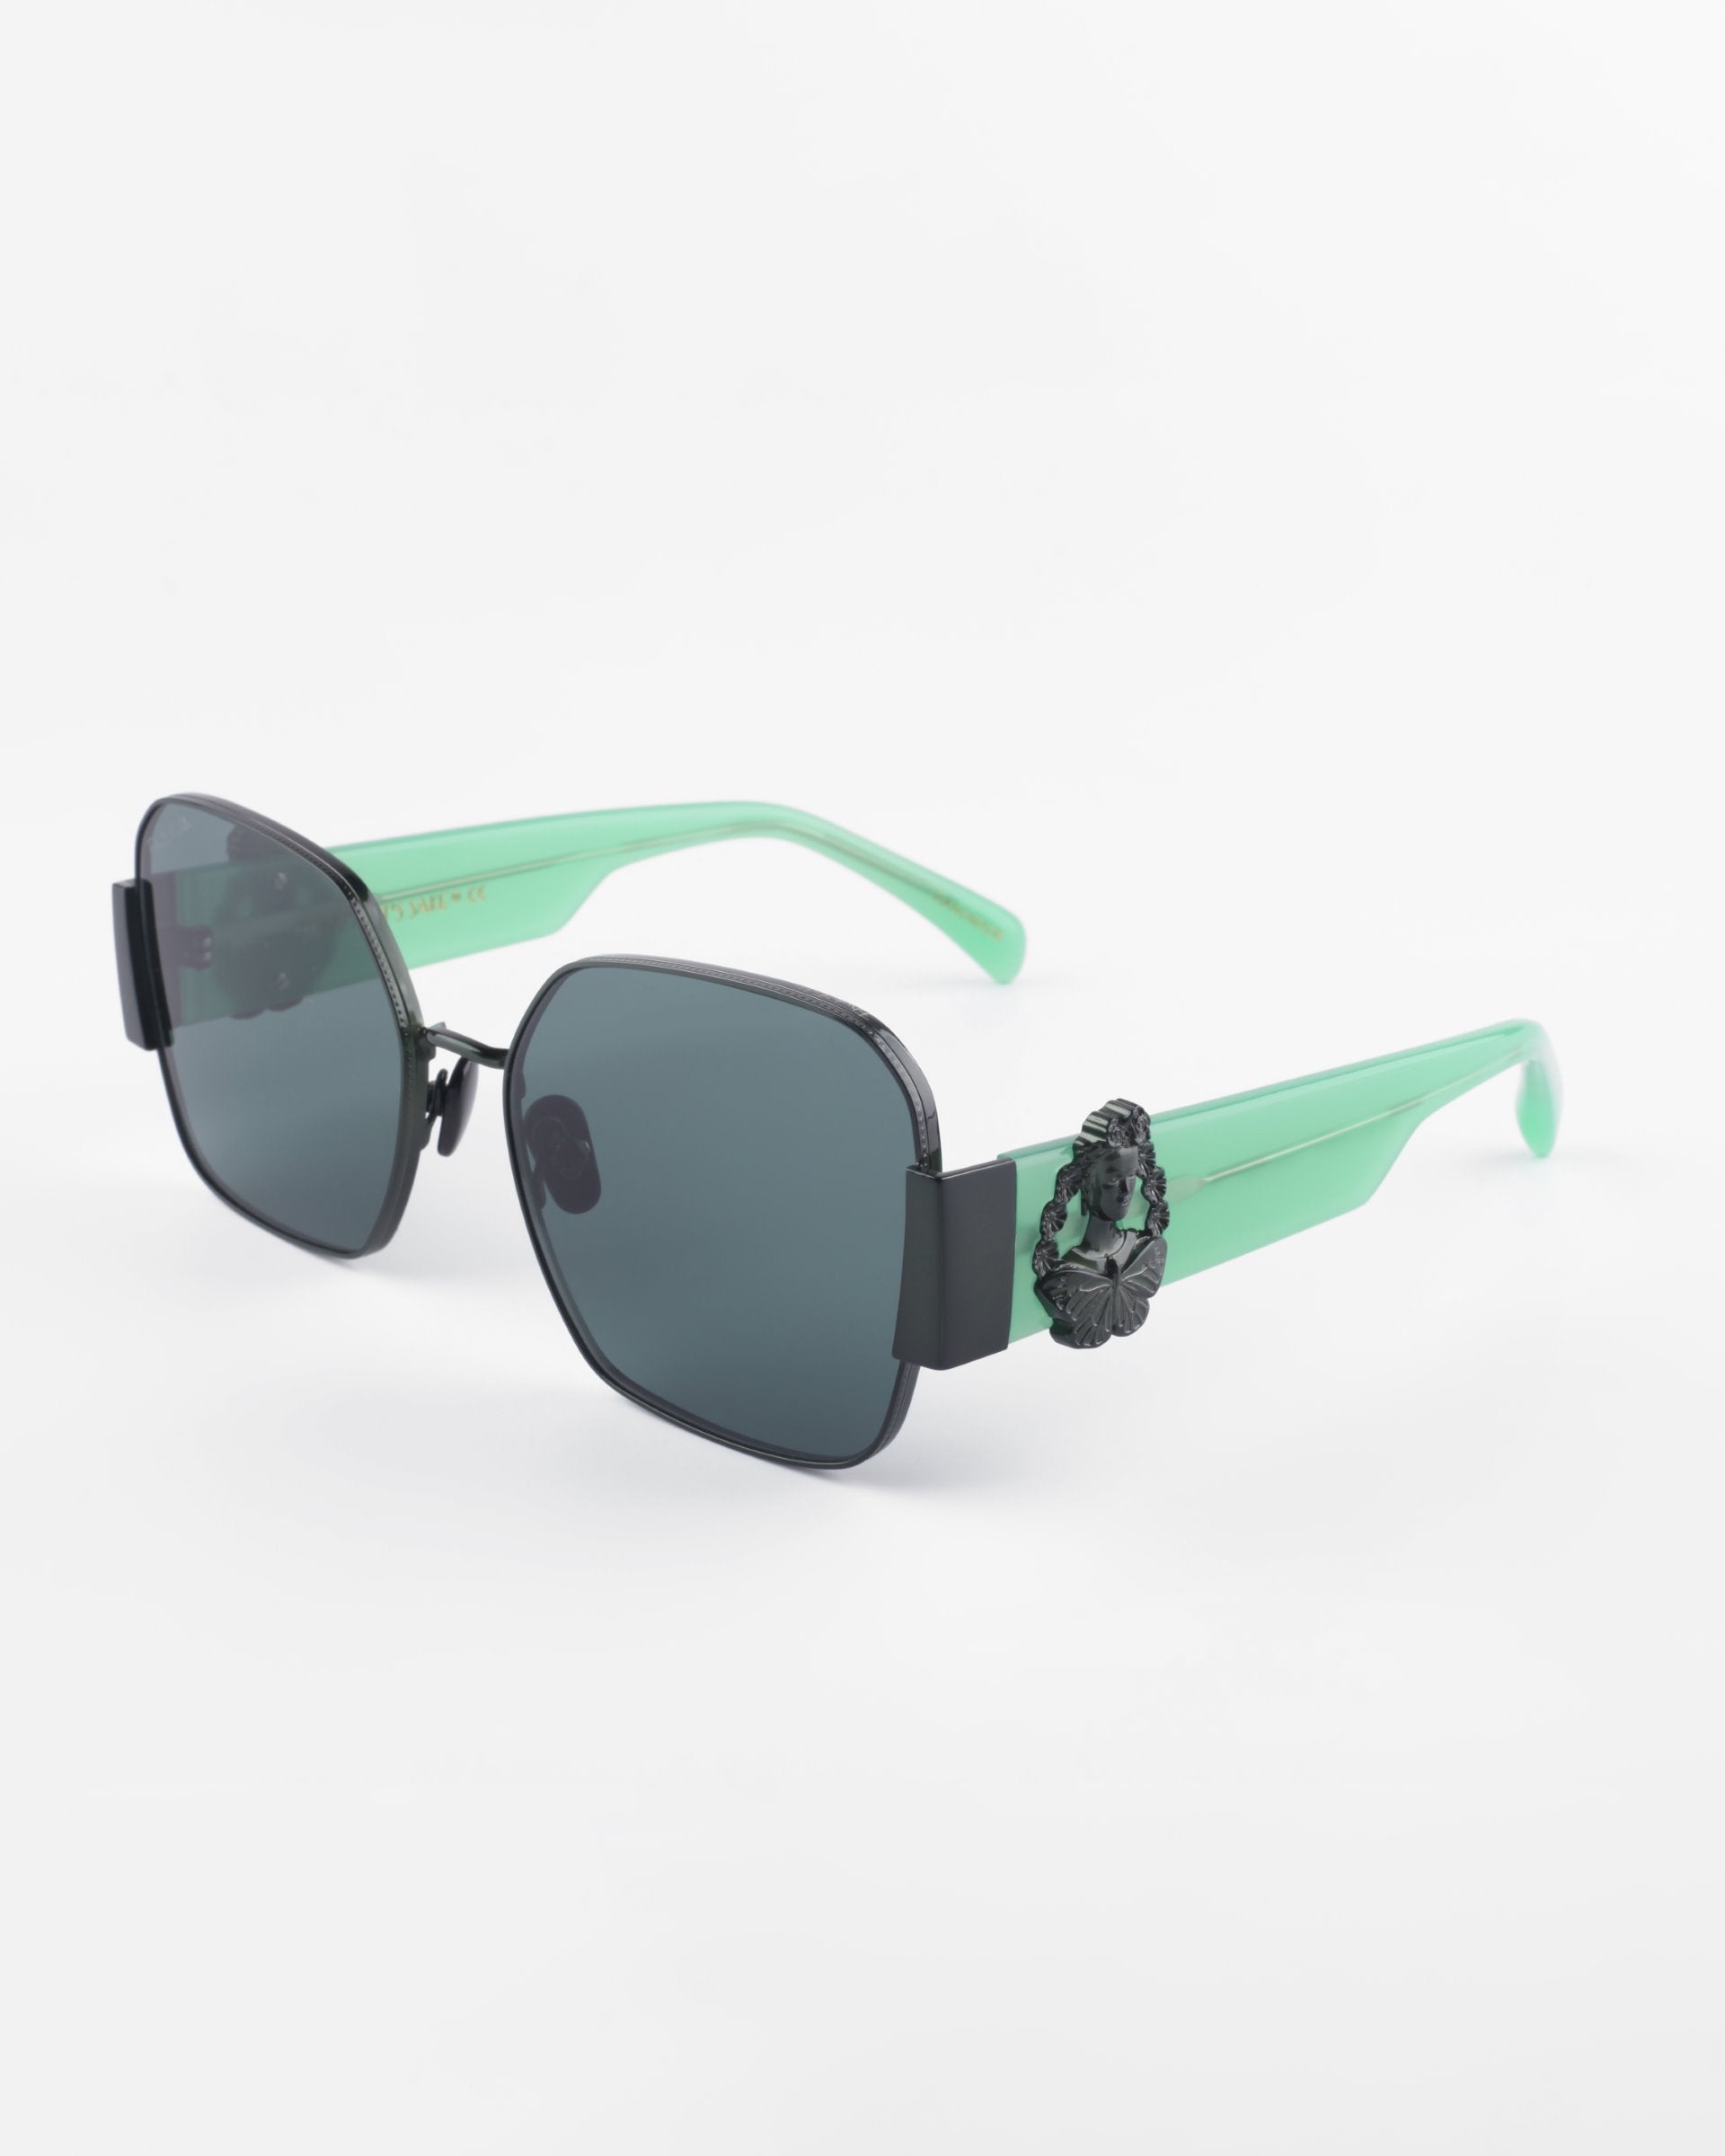 A pair of stylish **For Art&#39;s Sake® Frida Mask** sunglasses featuring black rectangular lenses with ultra-lightweight Nylon material and vibrant mint green frames. The temples are mint green with a decorative embellishment near the hinges, offering 100% UVA &amp; UVB protection. The background is plain white.